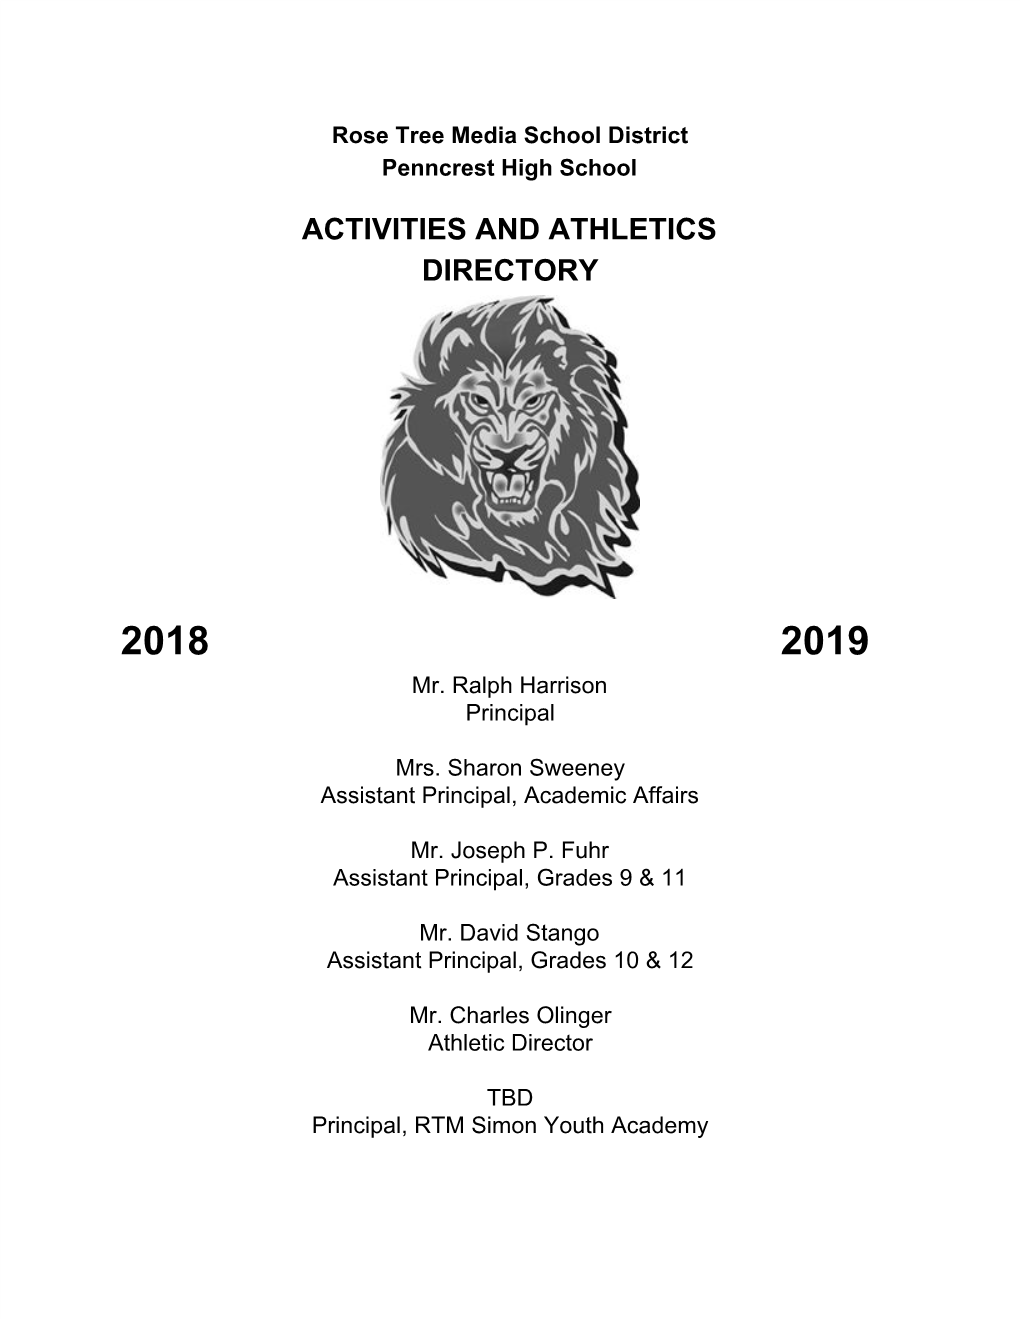 Activities and Athletics Directory